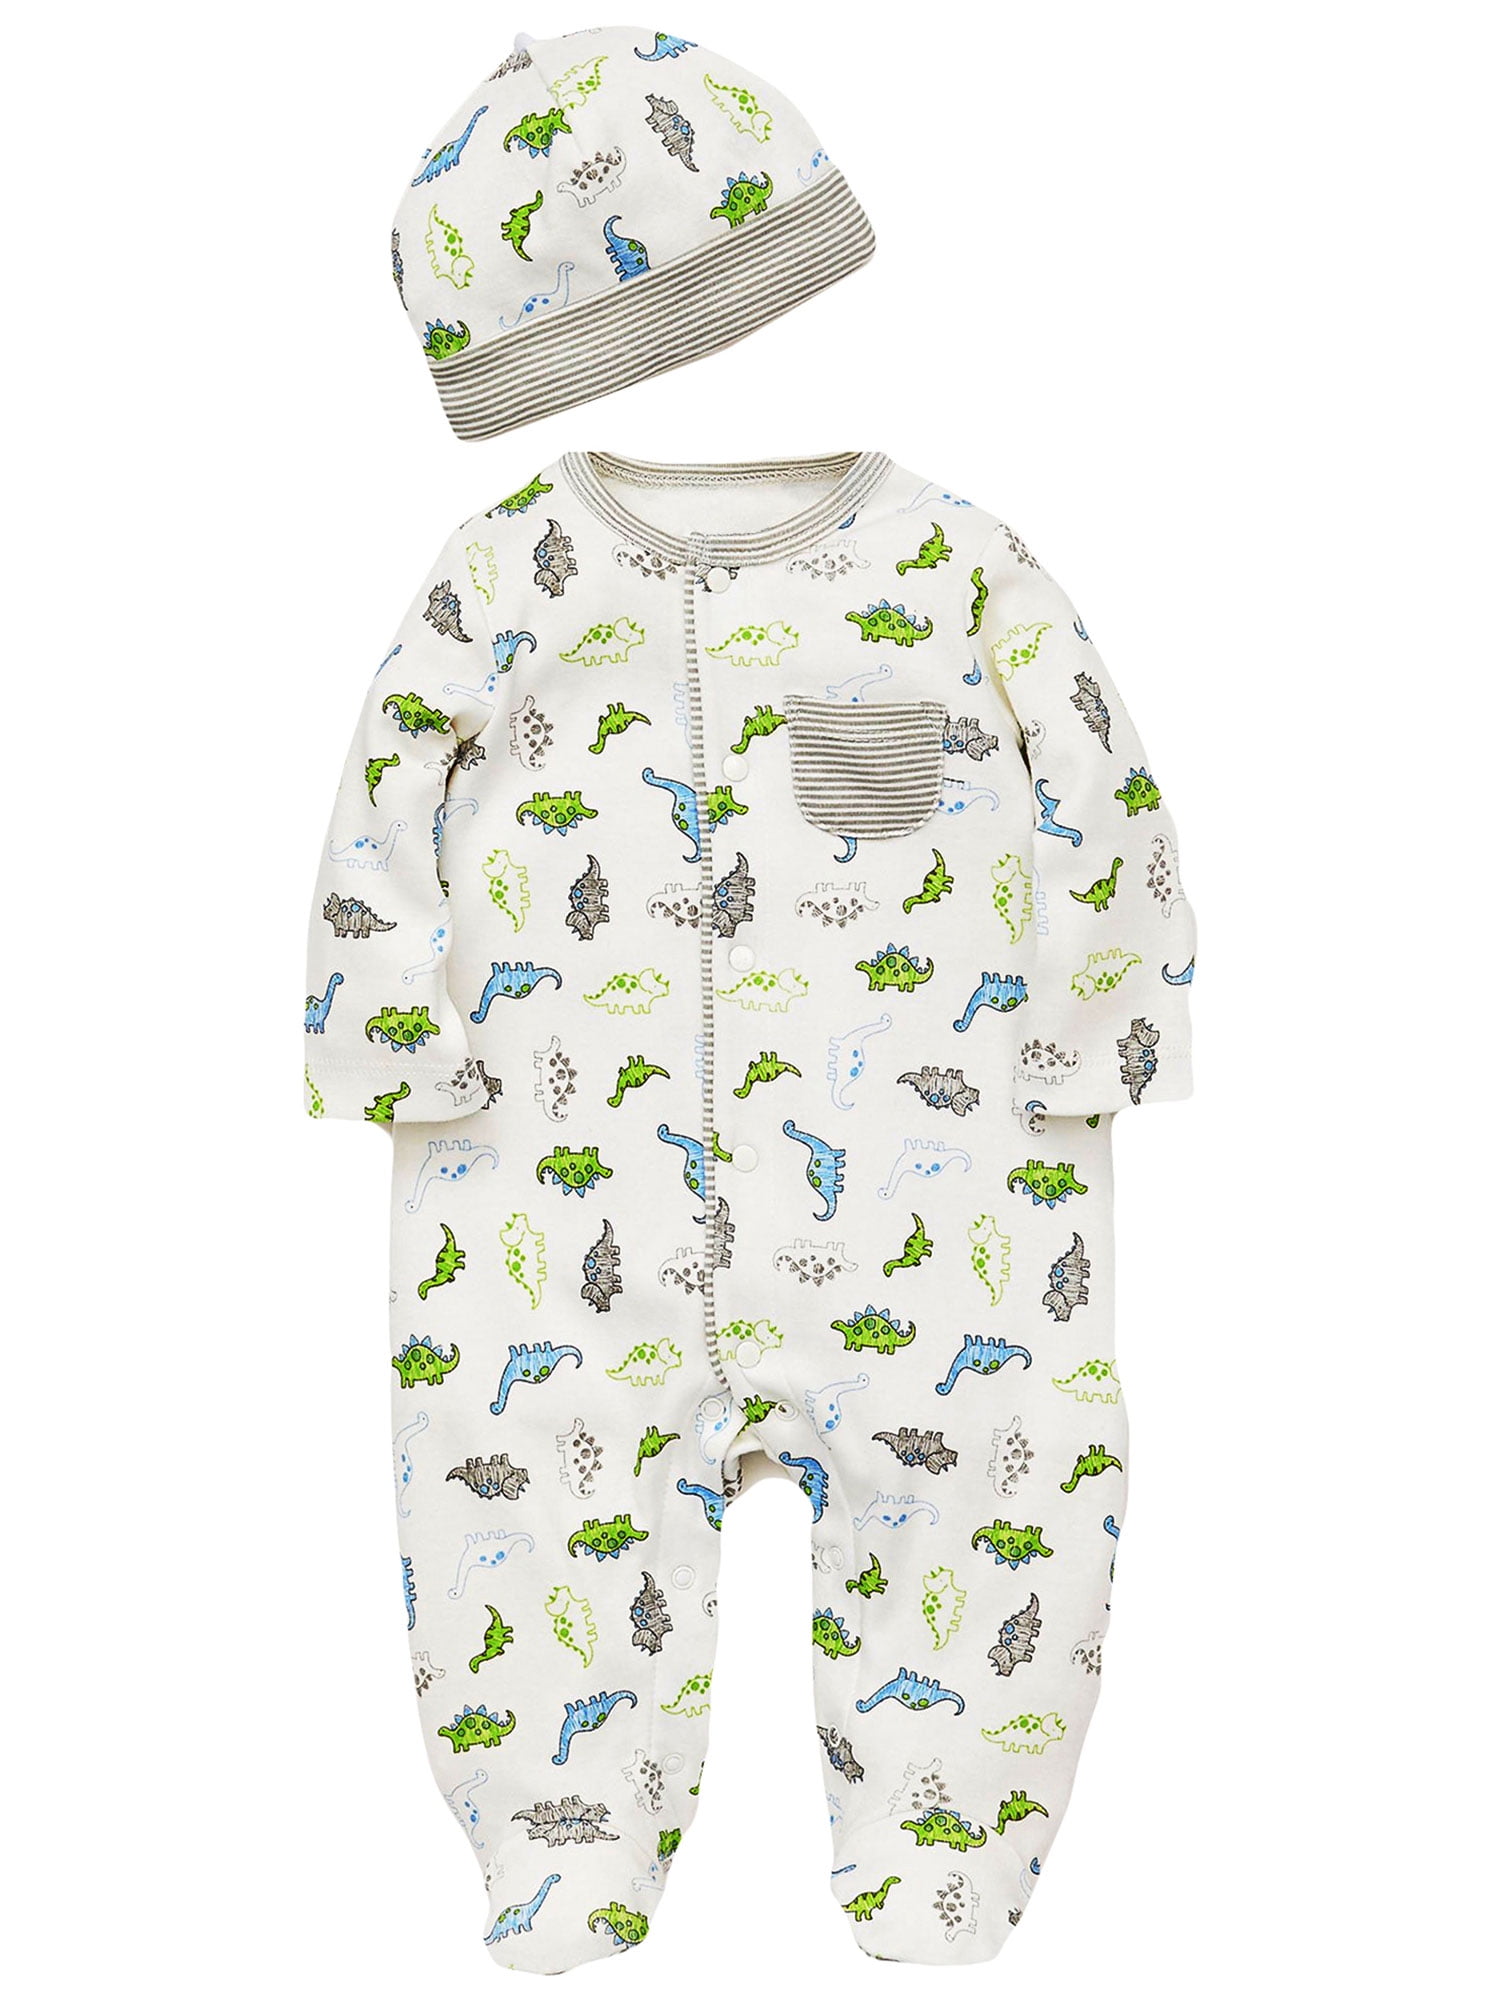 Details about   NWT Little ME Preemie boy White/Gray with Dinosaurs Footed sleep N Play outfit. 